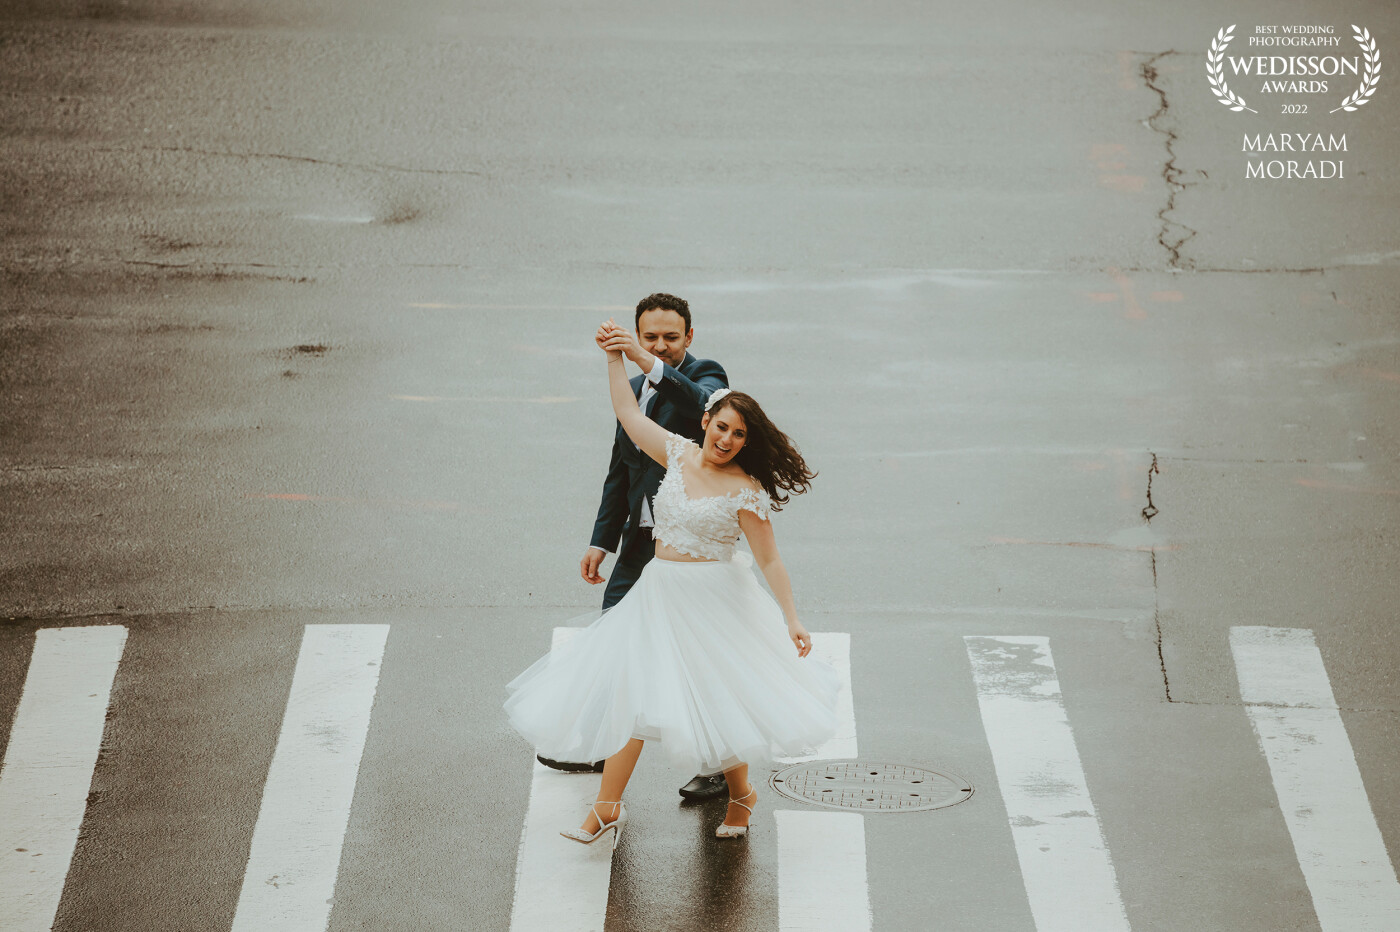 West Side Dance<br />
It was such a fun day with Martha & Eddie at the high line NYC.<br />
When Martha hired me for her photo shoot, she said I would love to see our wedding picture to be on that winner’s list. So I delivered my promise. <br />
@marymor_photography<br />
New york city, US